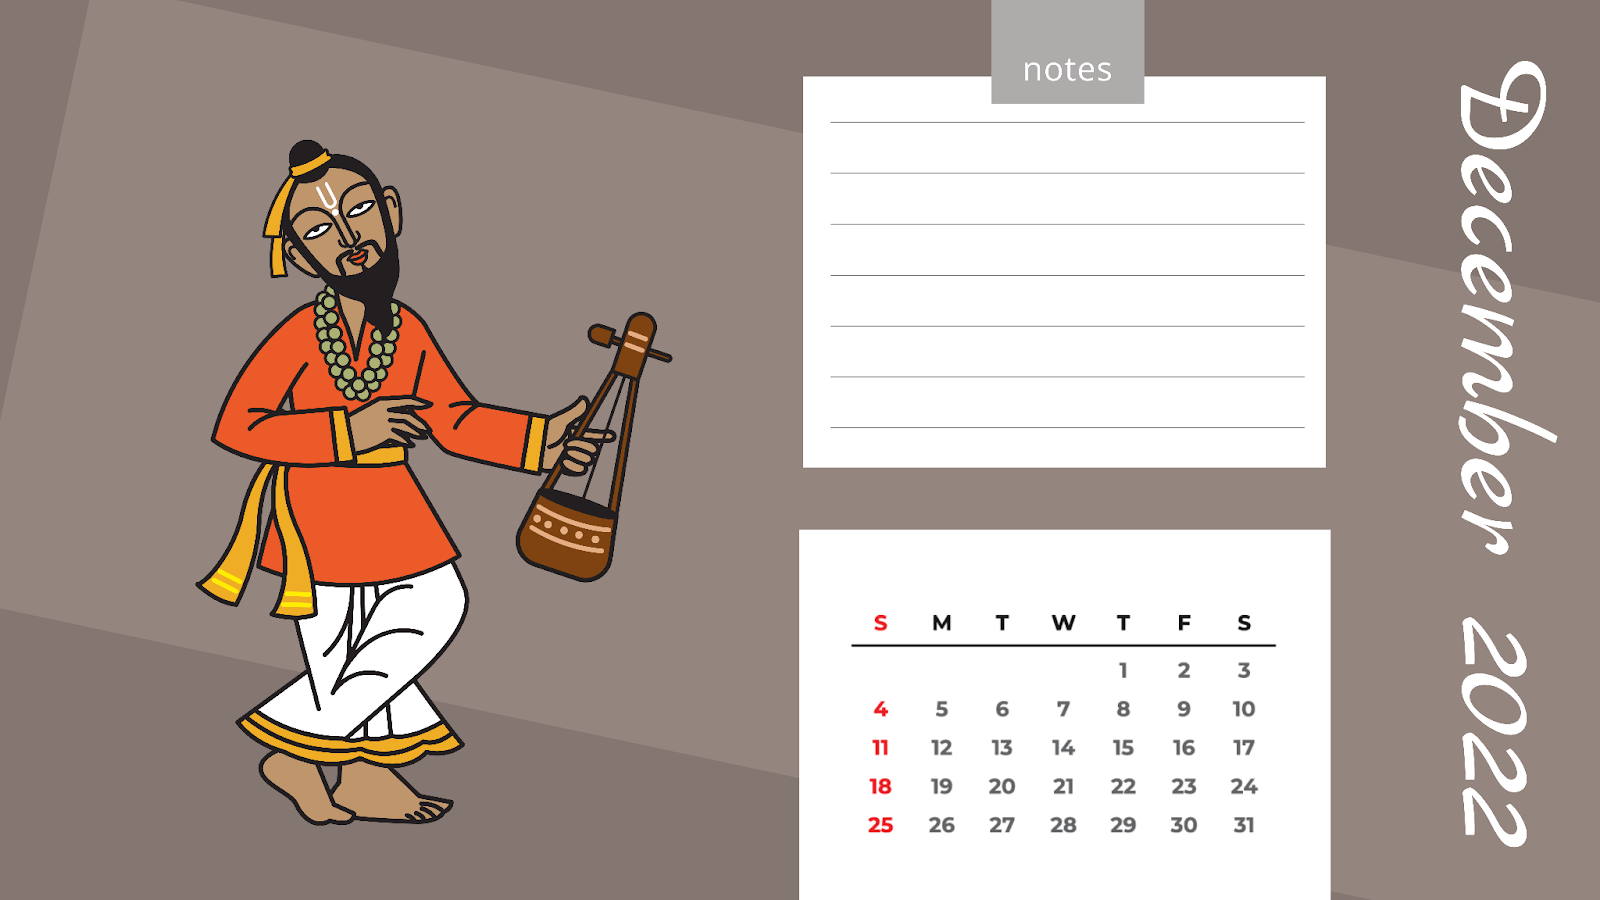 Customized Calendar December month with DrawHipo's Art of Bengal Illustrations  